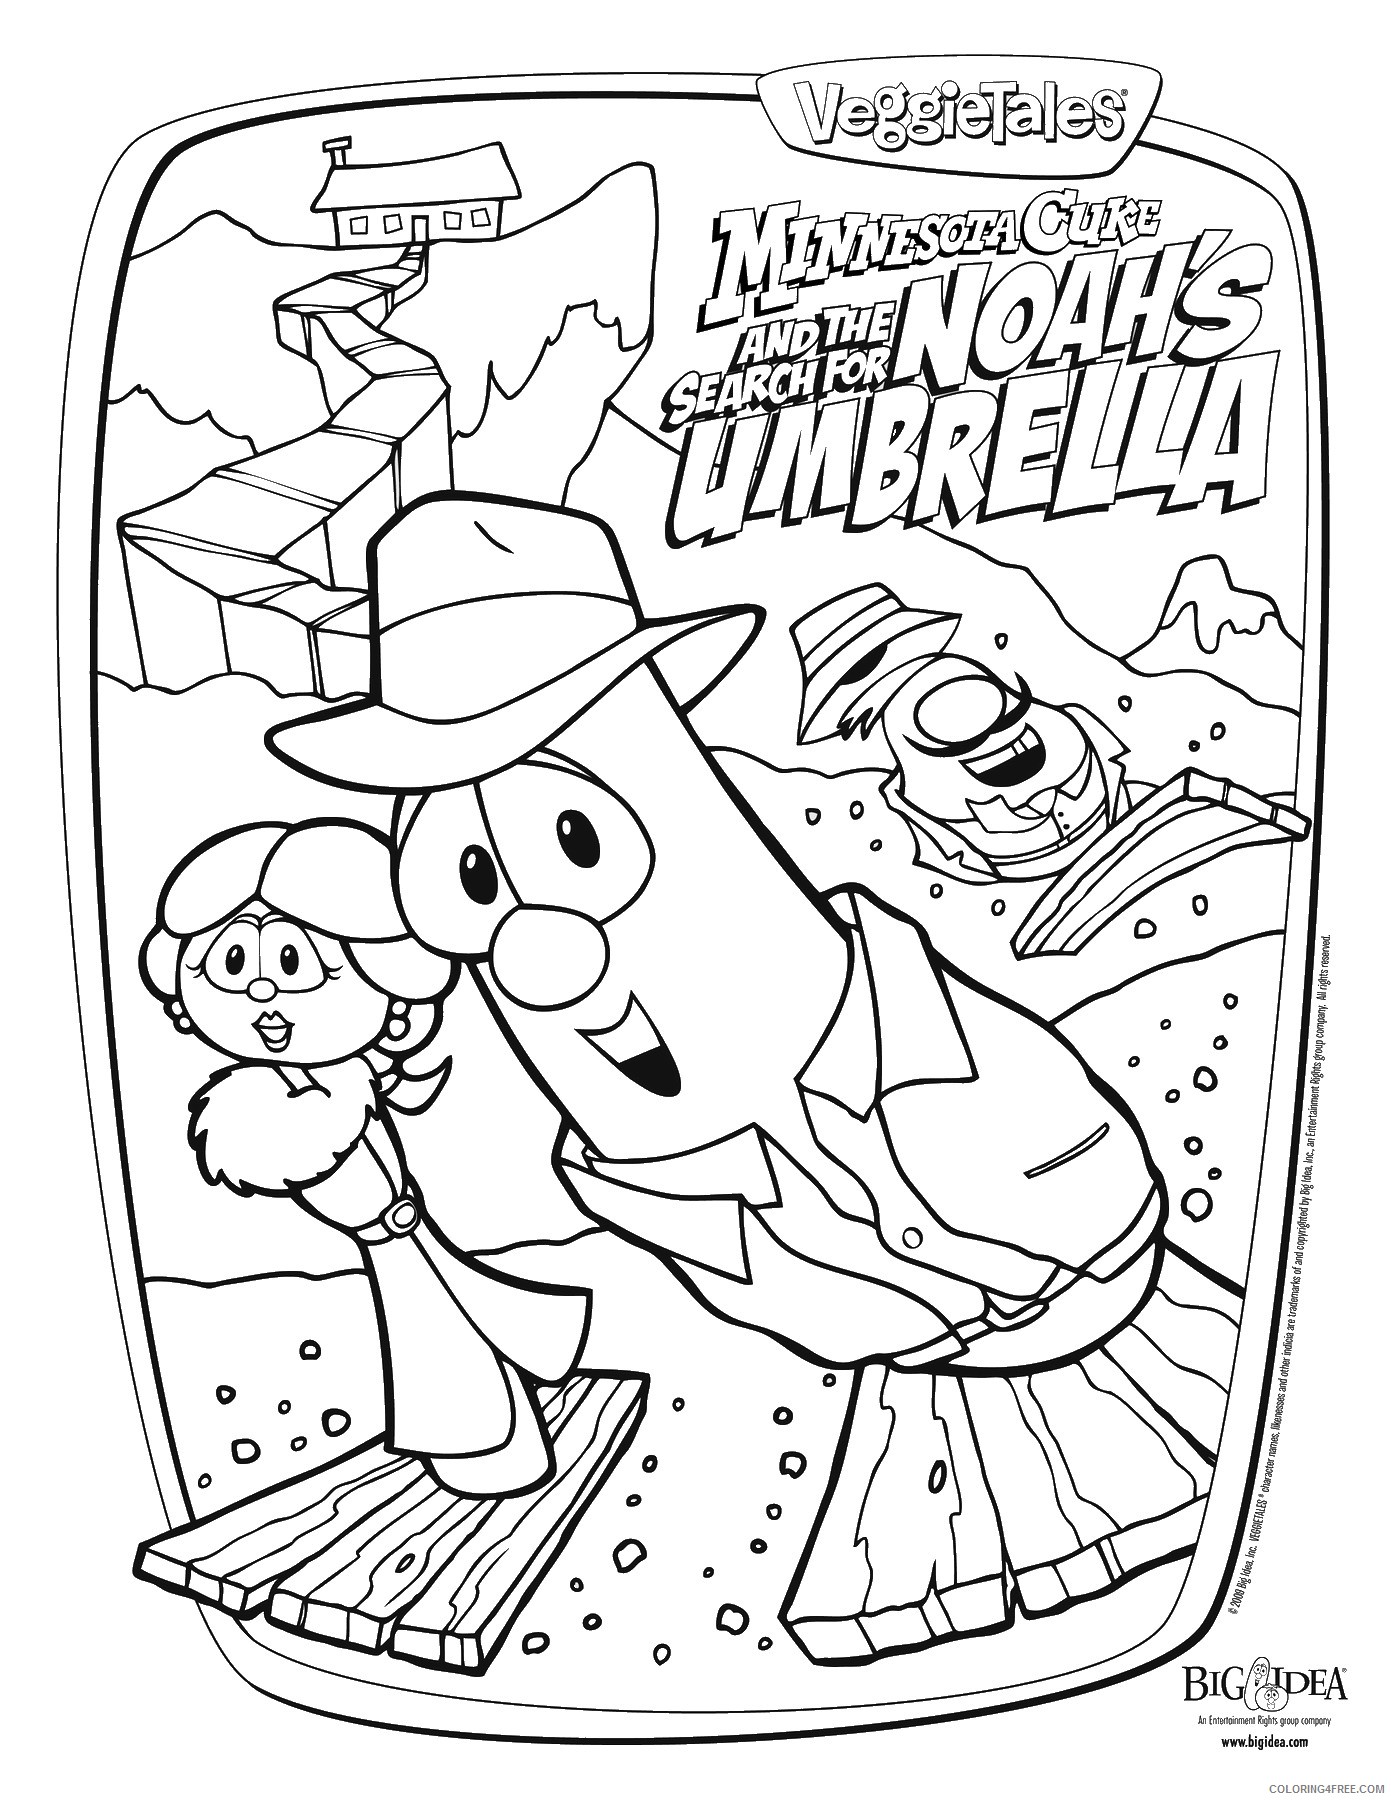 veggie tales coloring pages movie Coloring4free